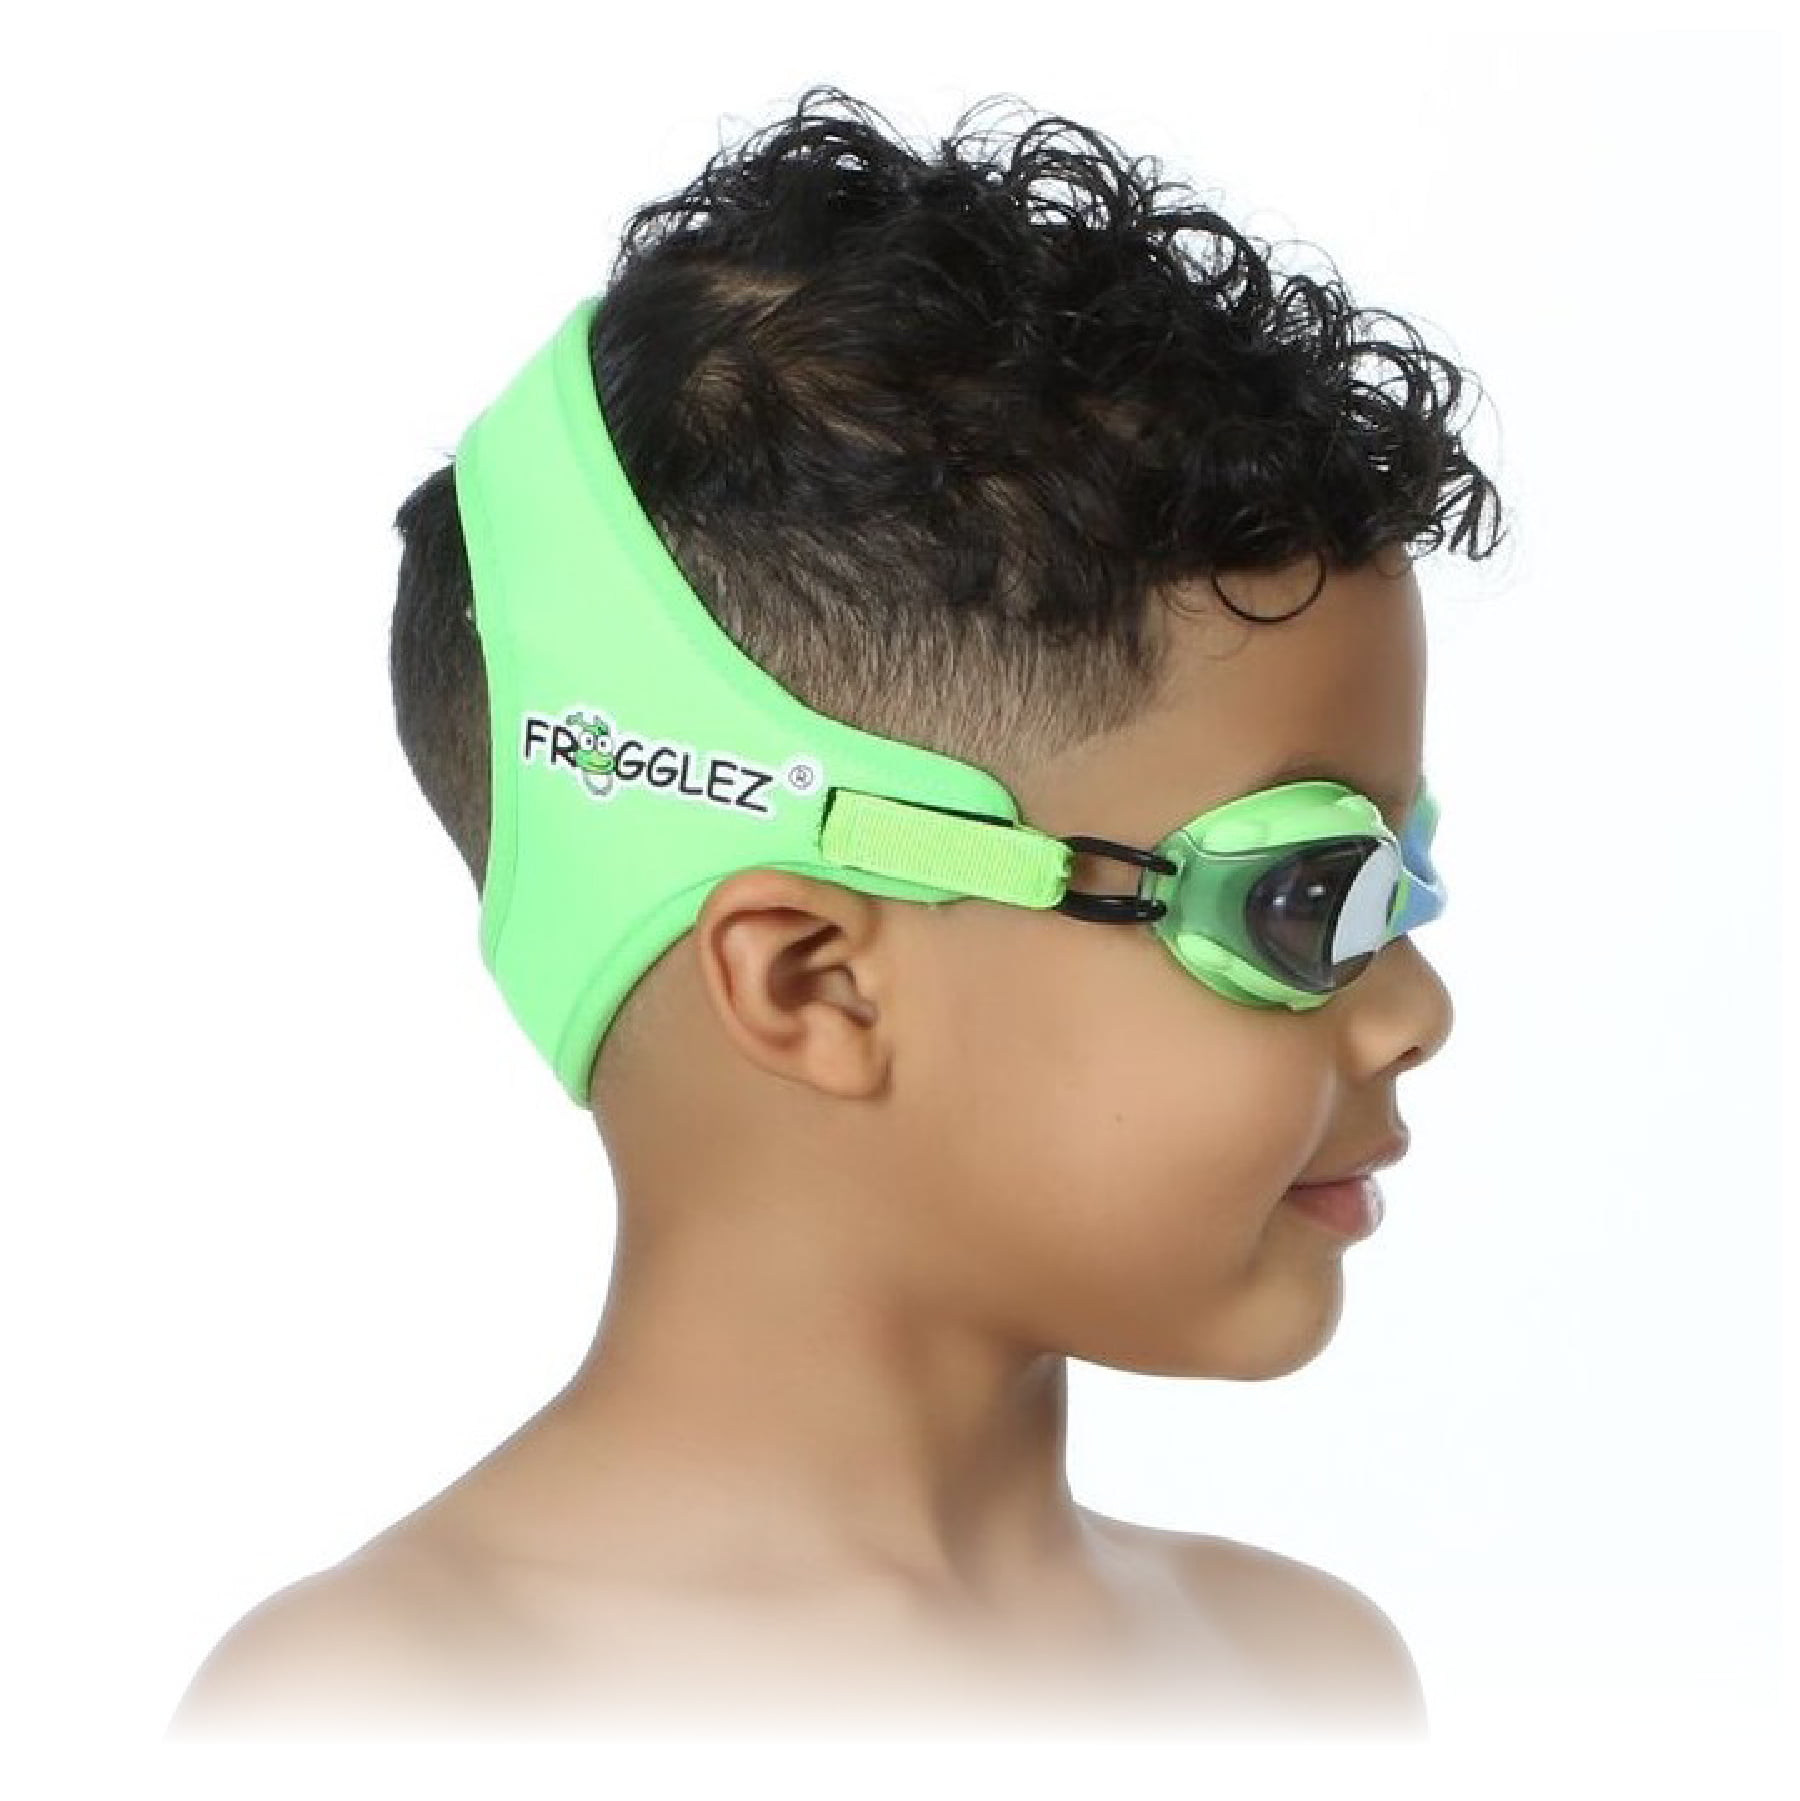 Kids Swim Goggles Pain Free & No Hair Pull Goggles for Kids Swimming Kids Goggles with Fabric Strap Cover 